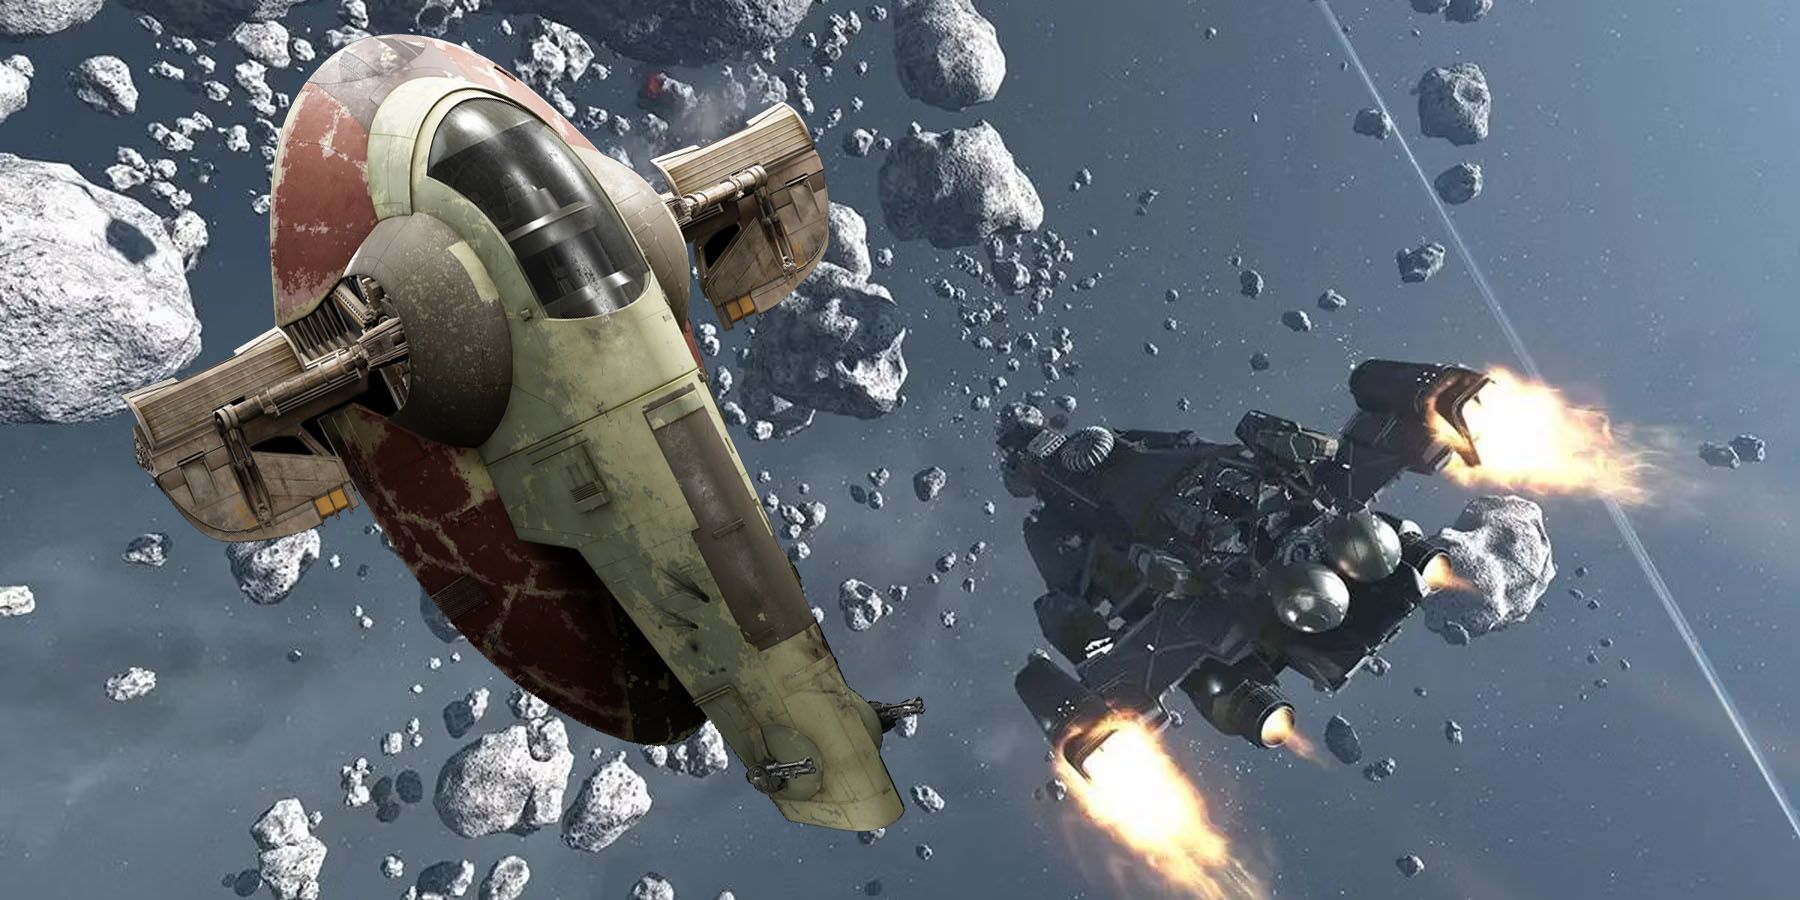 Starfield Player Builds Boba Fett’s Ship From Star Wars